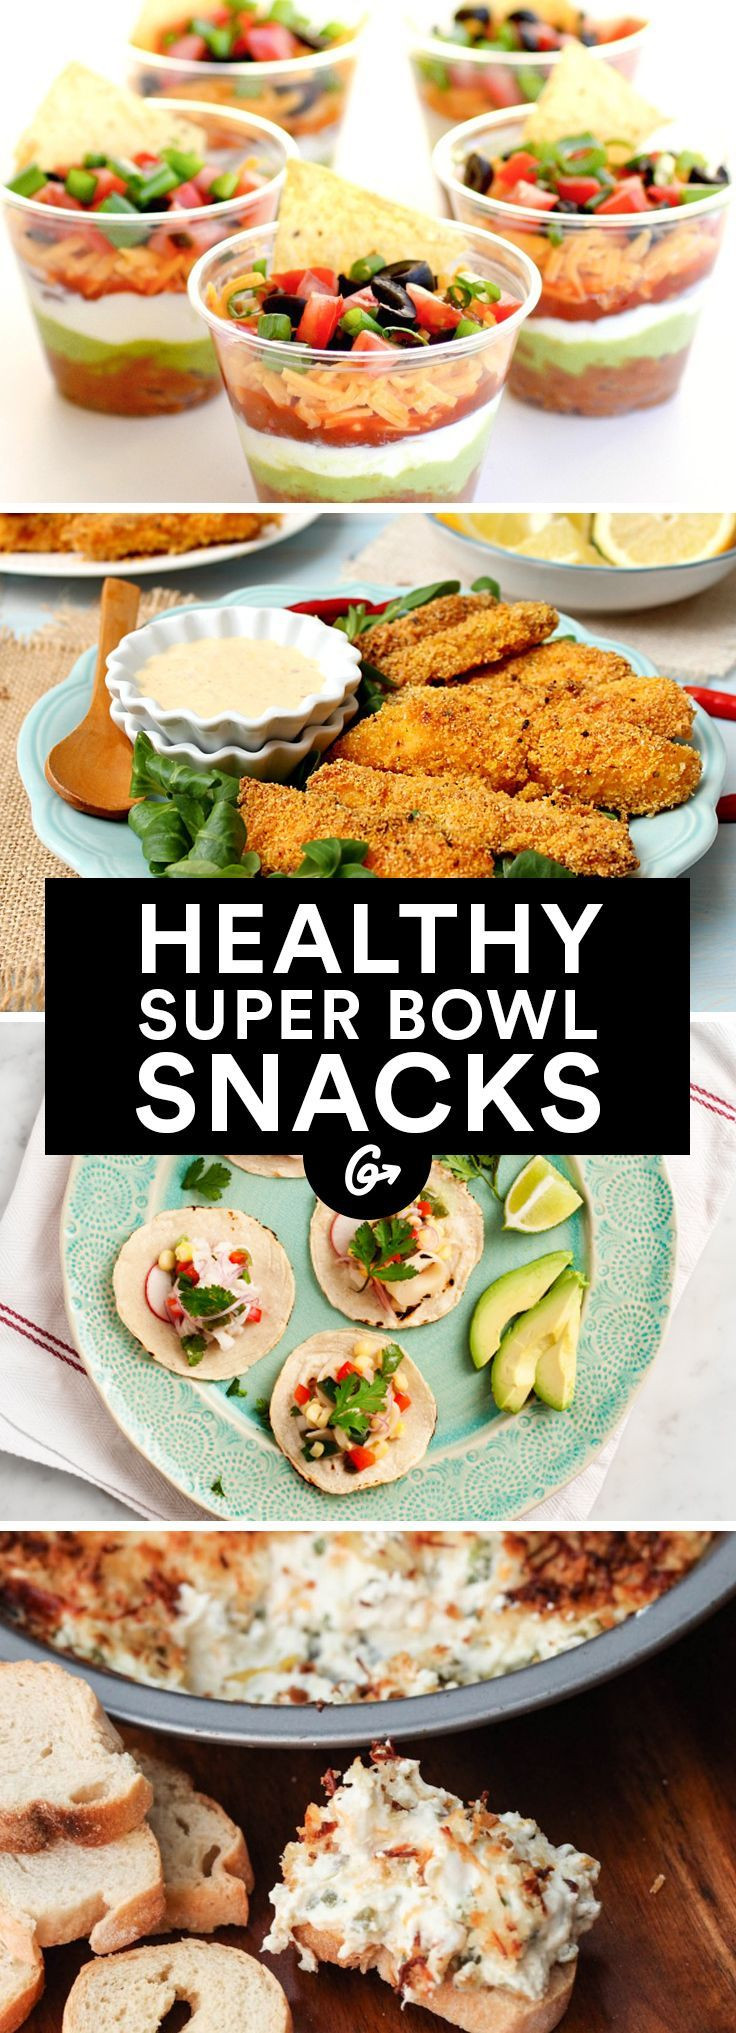 Healthy Superbowl Appetizers
 1000 images about Weight Loss and Healthy Lifestyle Tips